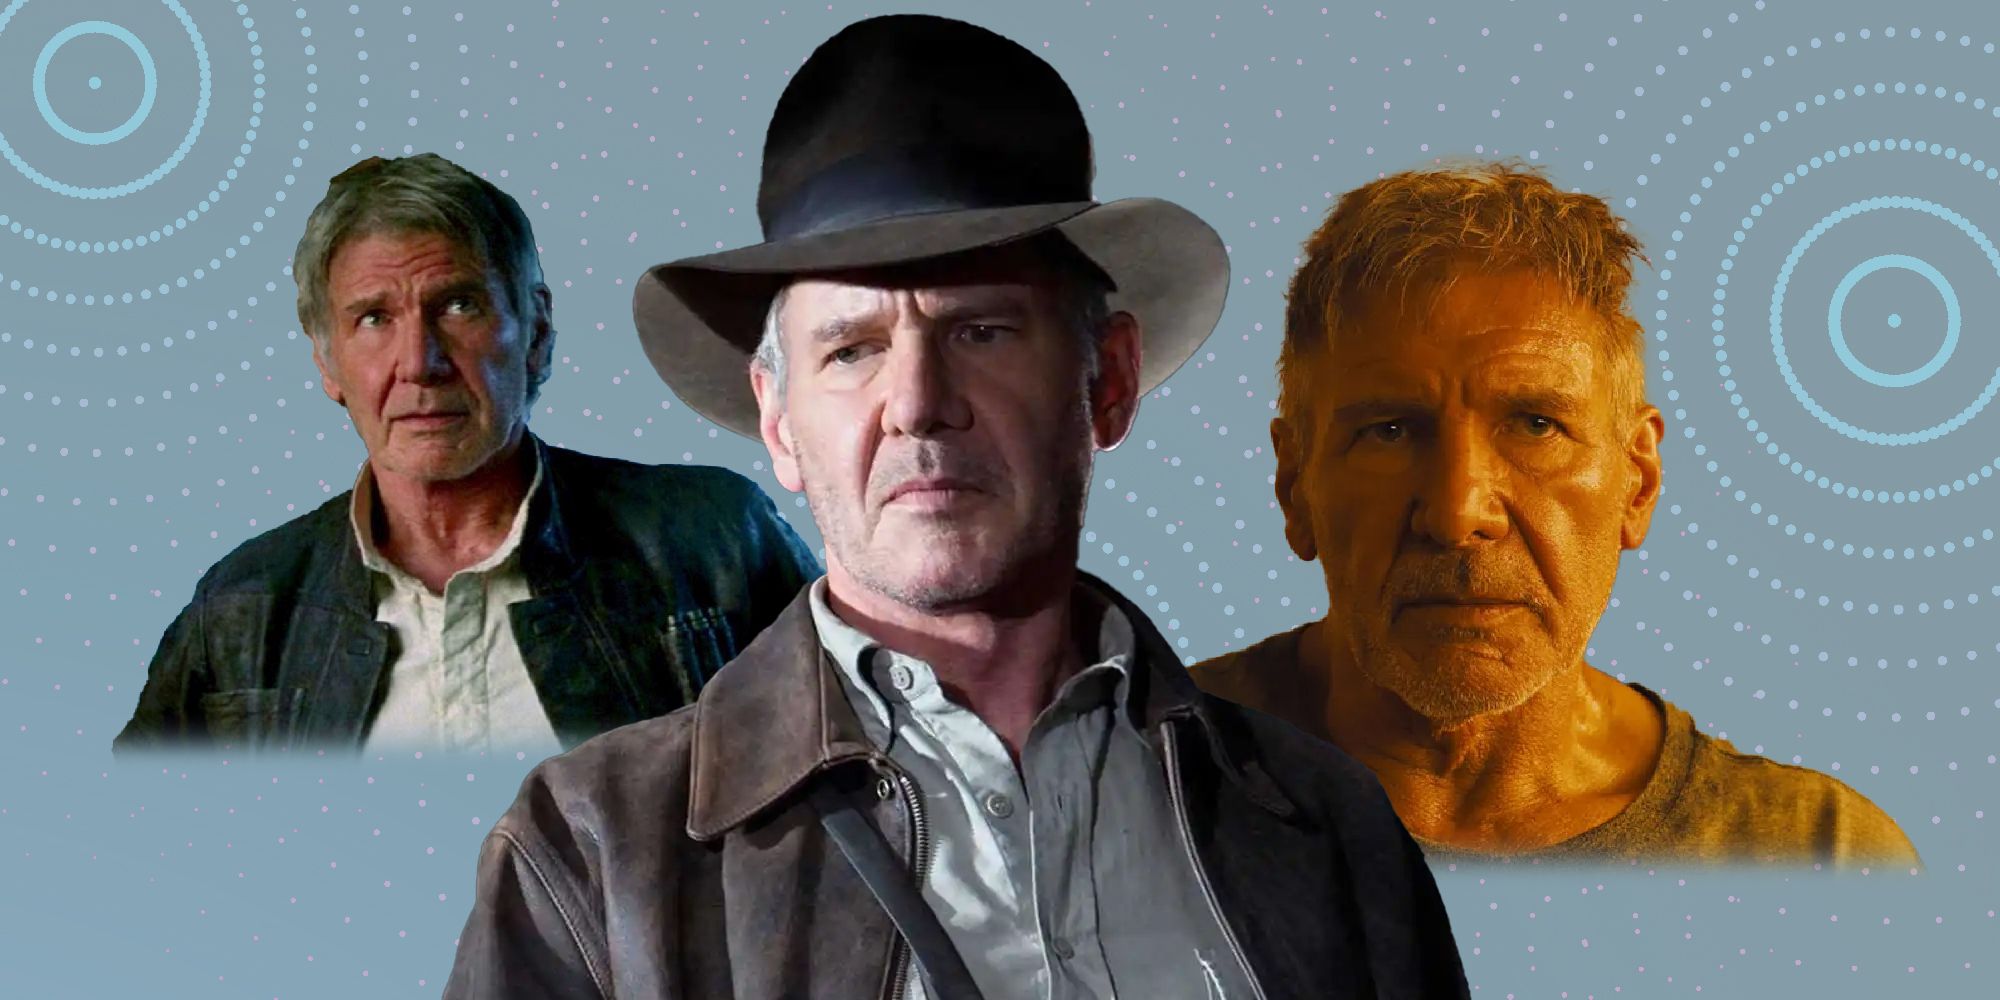 Harrison Ford in the lega-sequels to Star Wars, Indiana Jones, and Blade Runner.